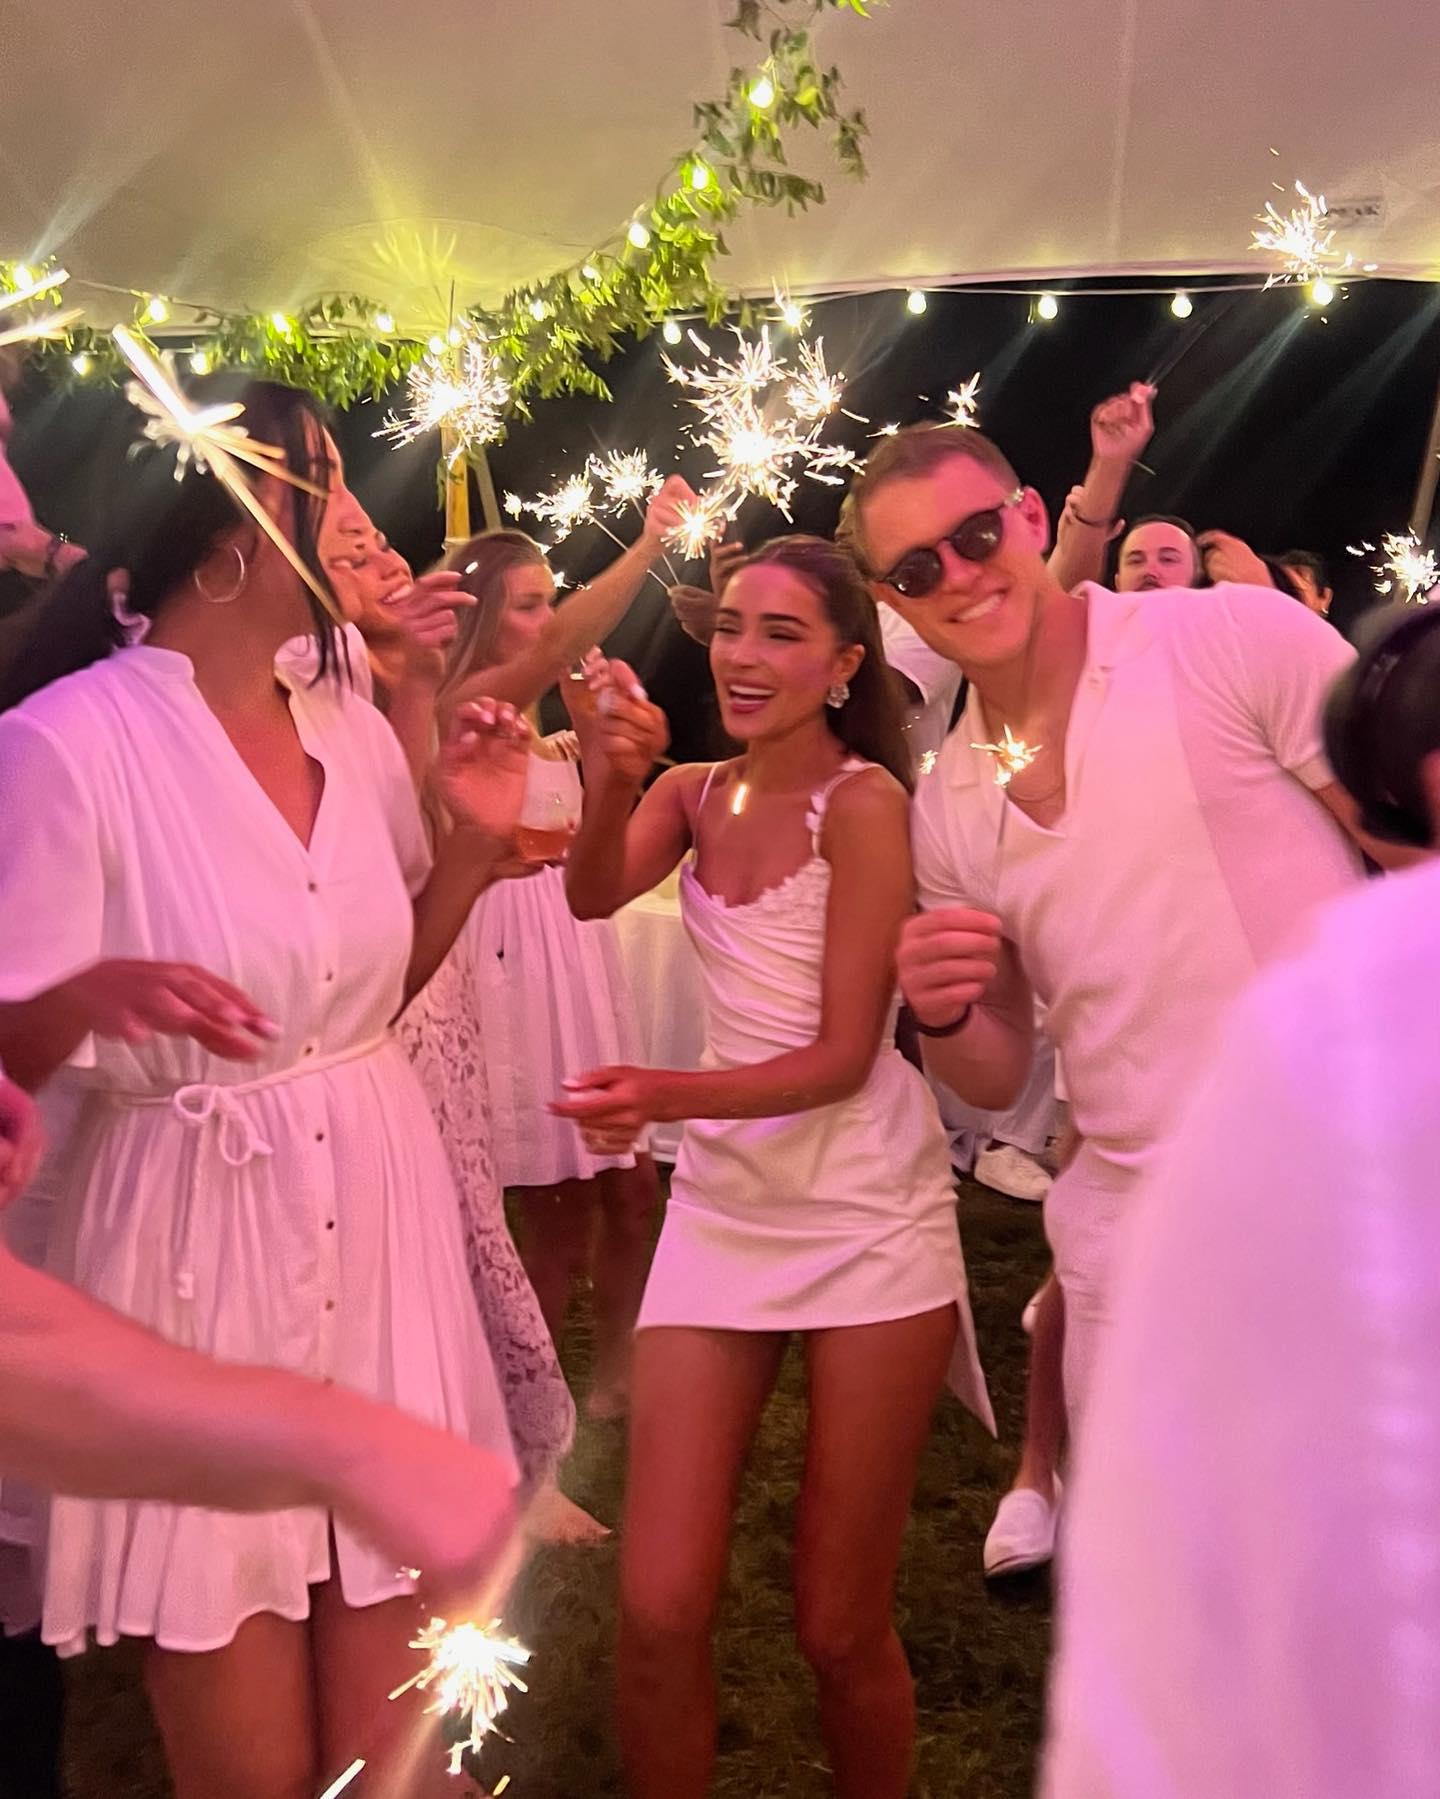 Christian McCaffrey and Olivia Culpo at engagement party